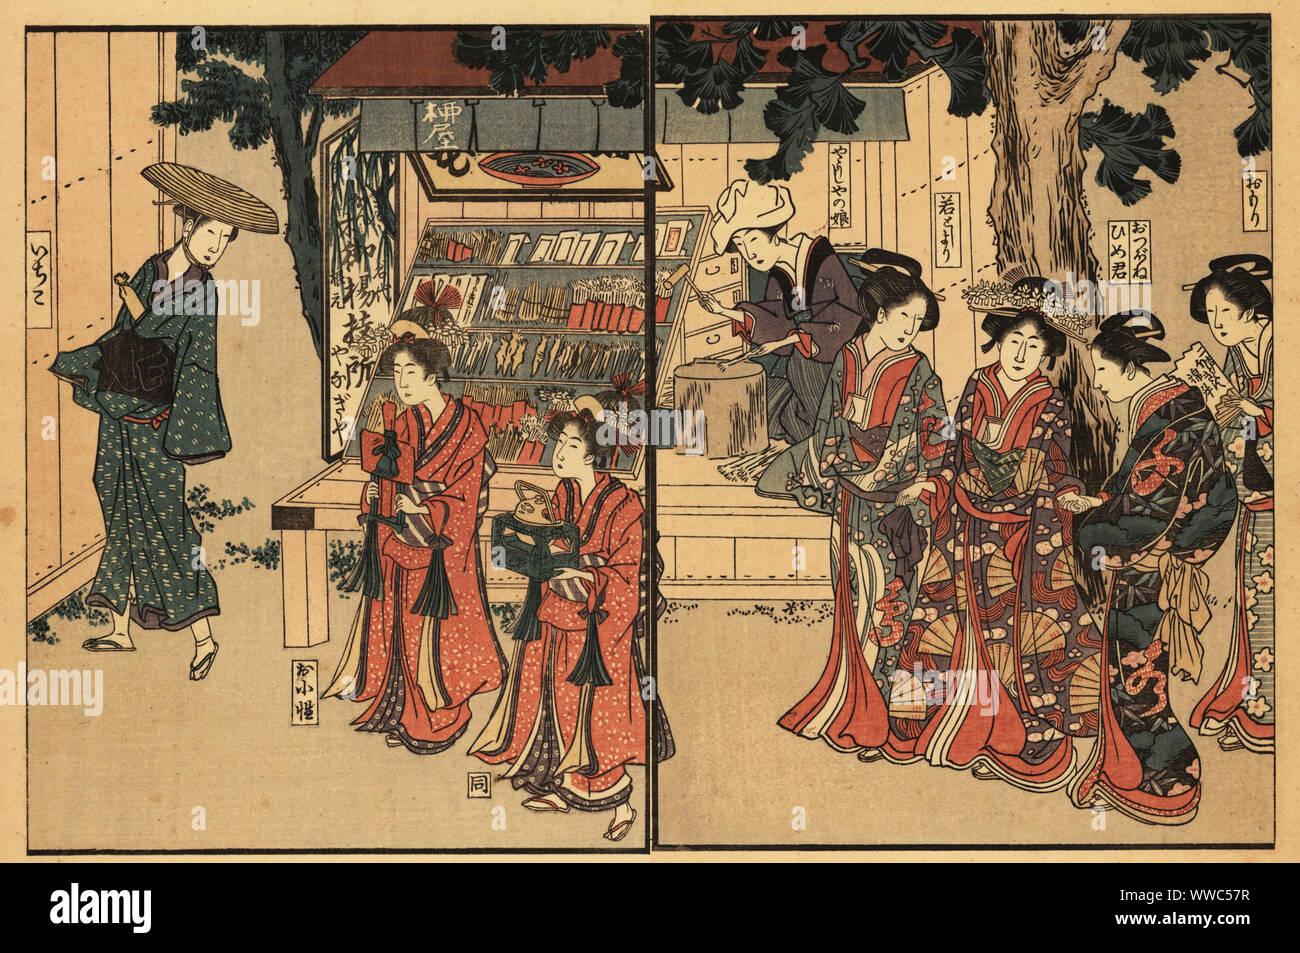 Aristocratic women parading passing a yojiya, a shop selling brushes and toothpicks, Tokyo, 18th century. Young maids carry a mirror and a portable stove in front of four women in fine kimono Female pilgrim ichiko at left. Handcoloured ukiyo-e woodblock print by Toyokuni Utagawa from Shikitei Sanba’s Ehon Imayo Sugata (Picture Book of the Modern Forms and Figures, Tokyo, 1916. Reprint of the original from 1802. Handcoloured ukiyo-e woodblock print by Toyokuni Utagawa from Shikitei Sanba’s Ehon Imayo Sugata (Picture Book of the Modern Forms and Figures, Tokyo, 1916. Reprint of the original from Stock Photo